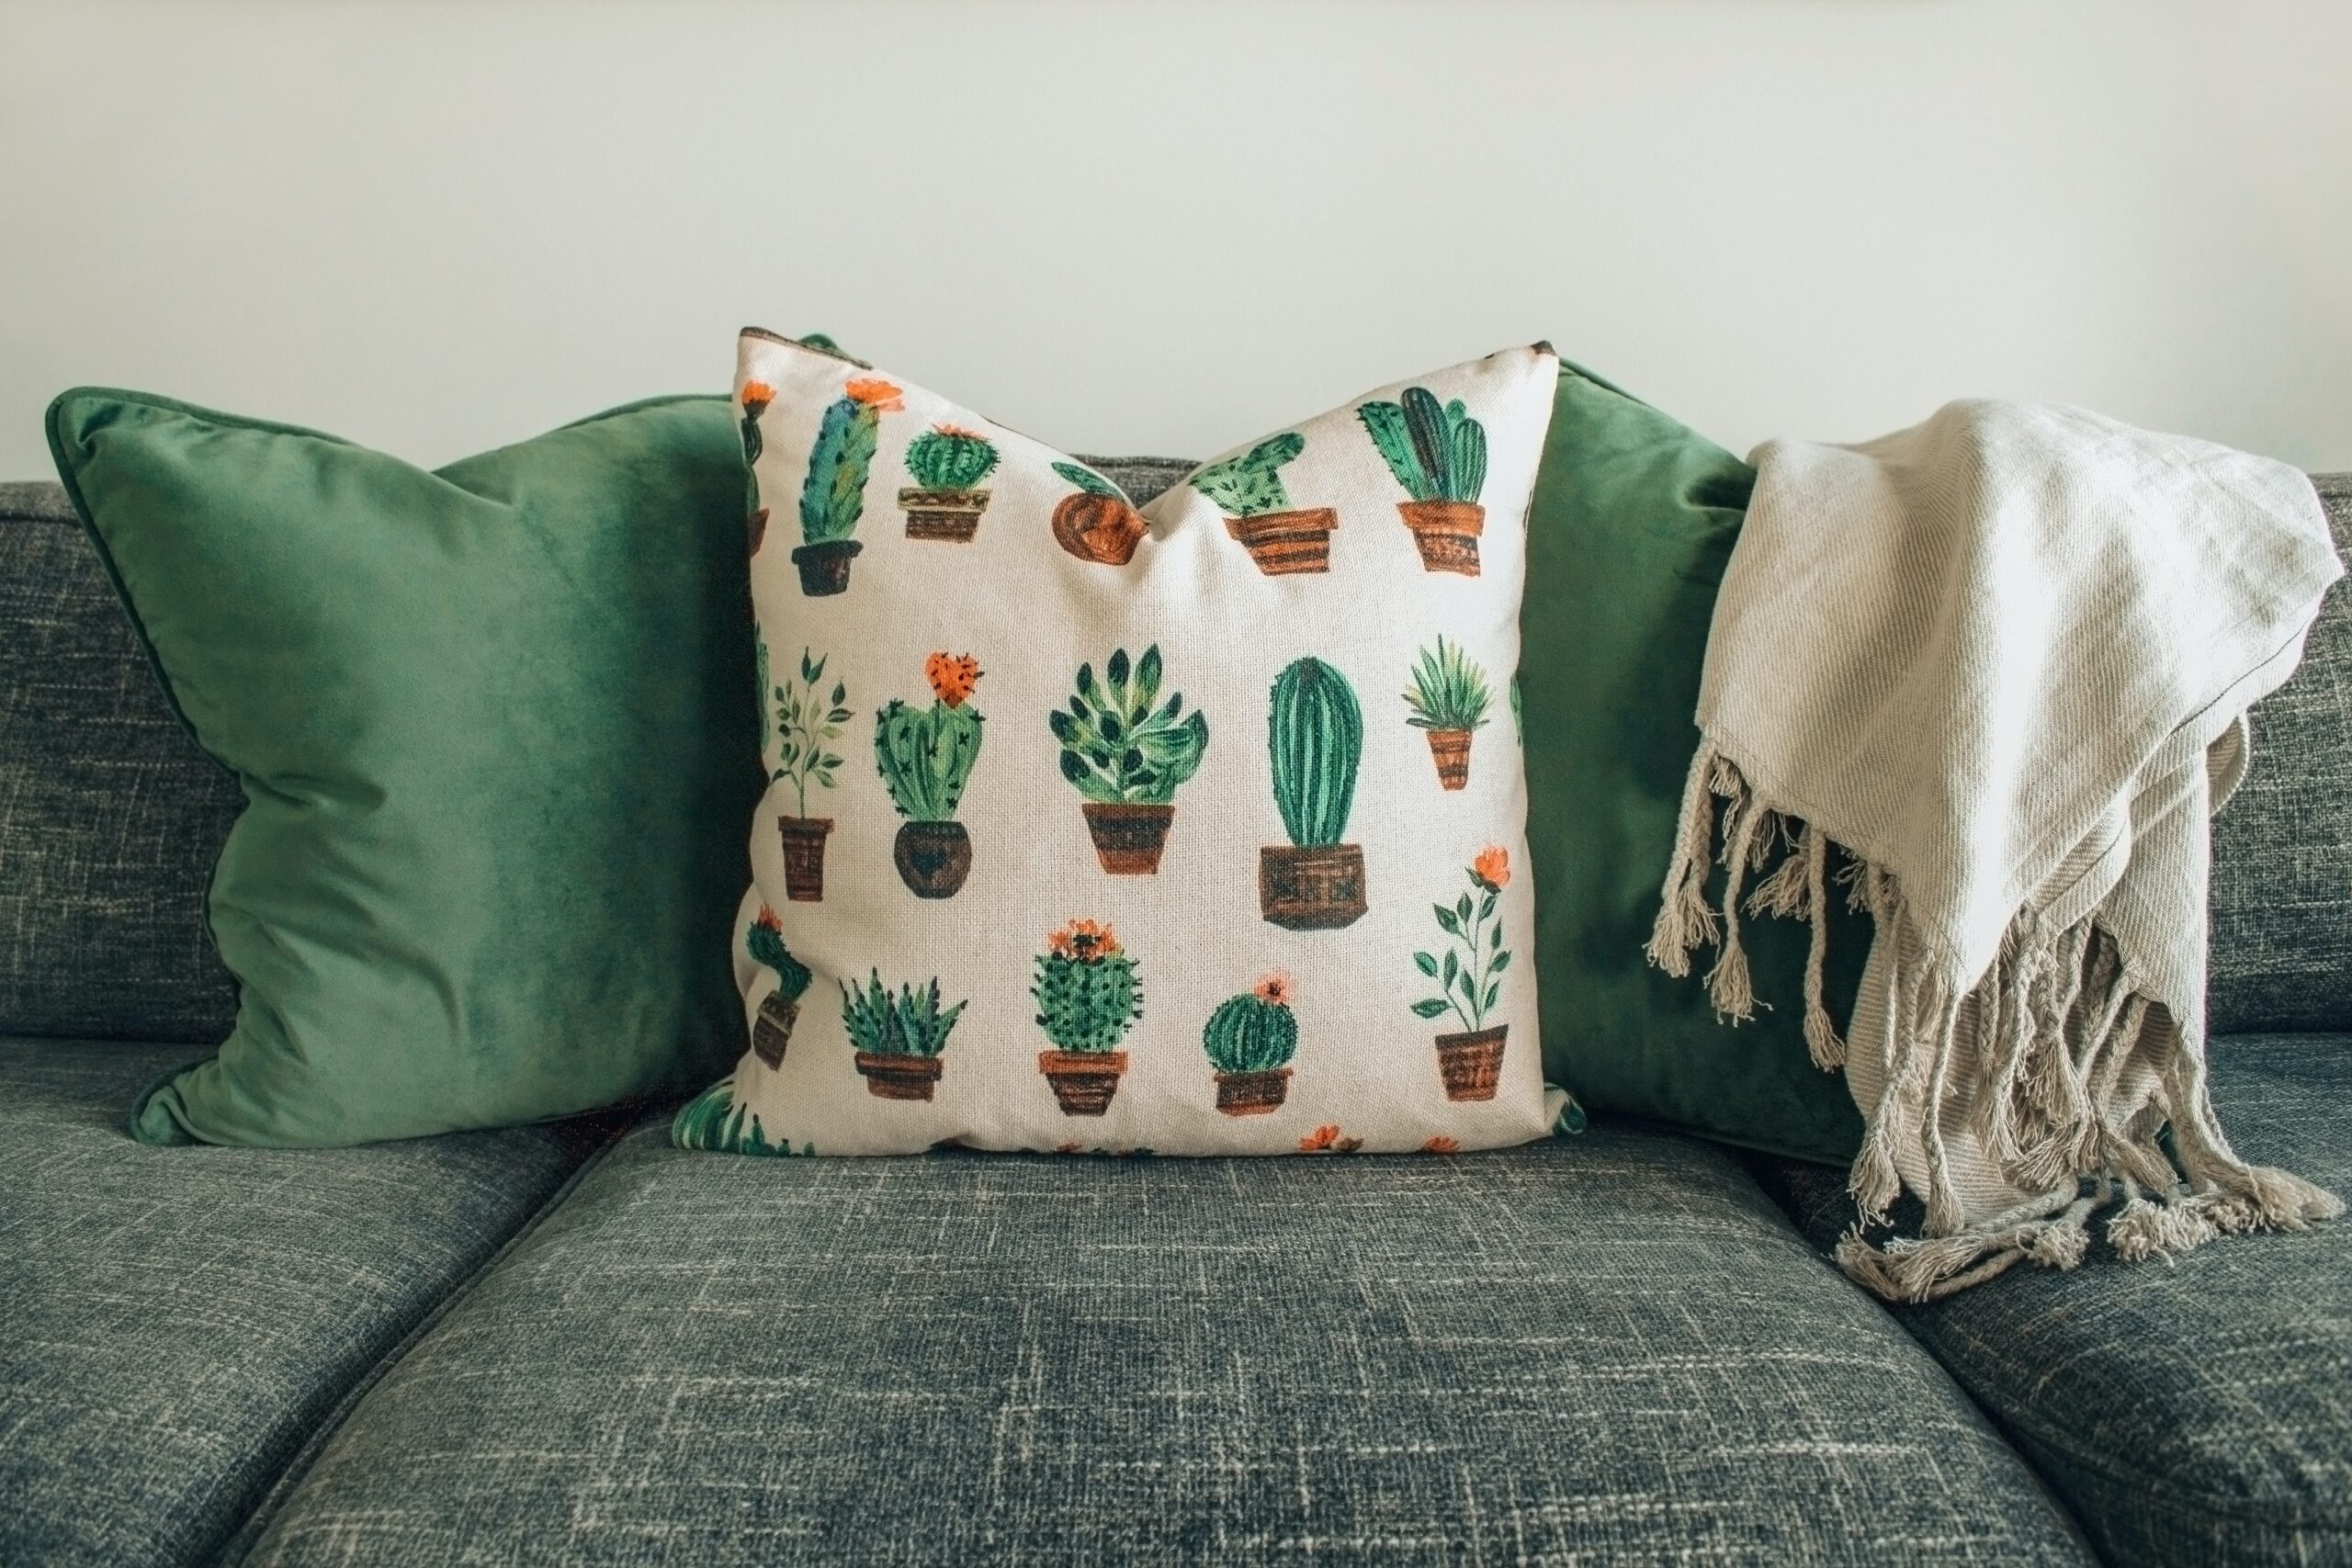 A sage green couch with green and artsy pillows. Pictured: a couch with pillows.